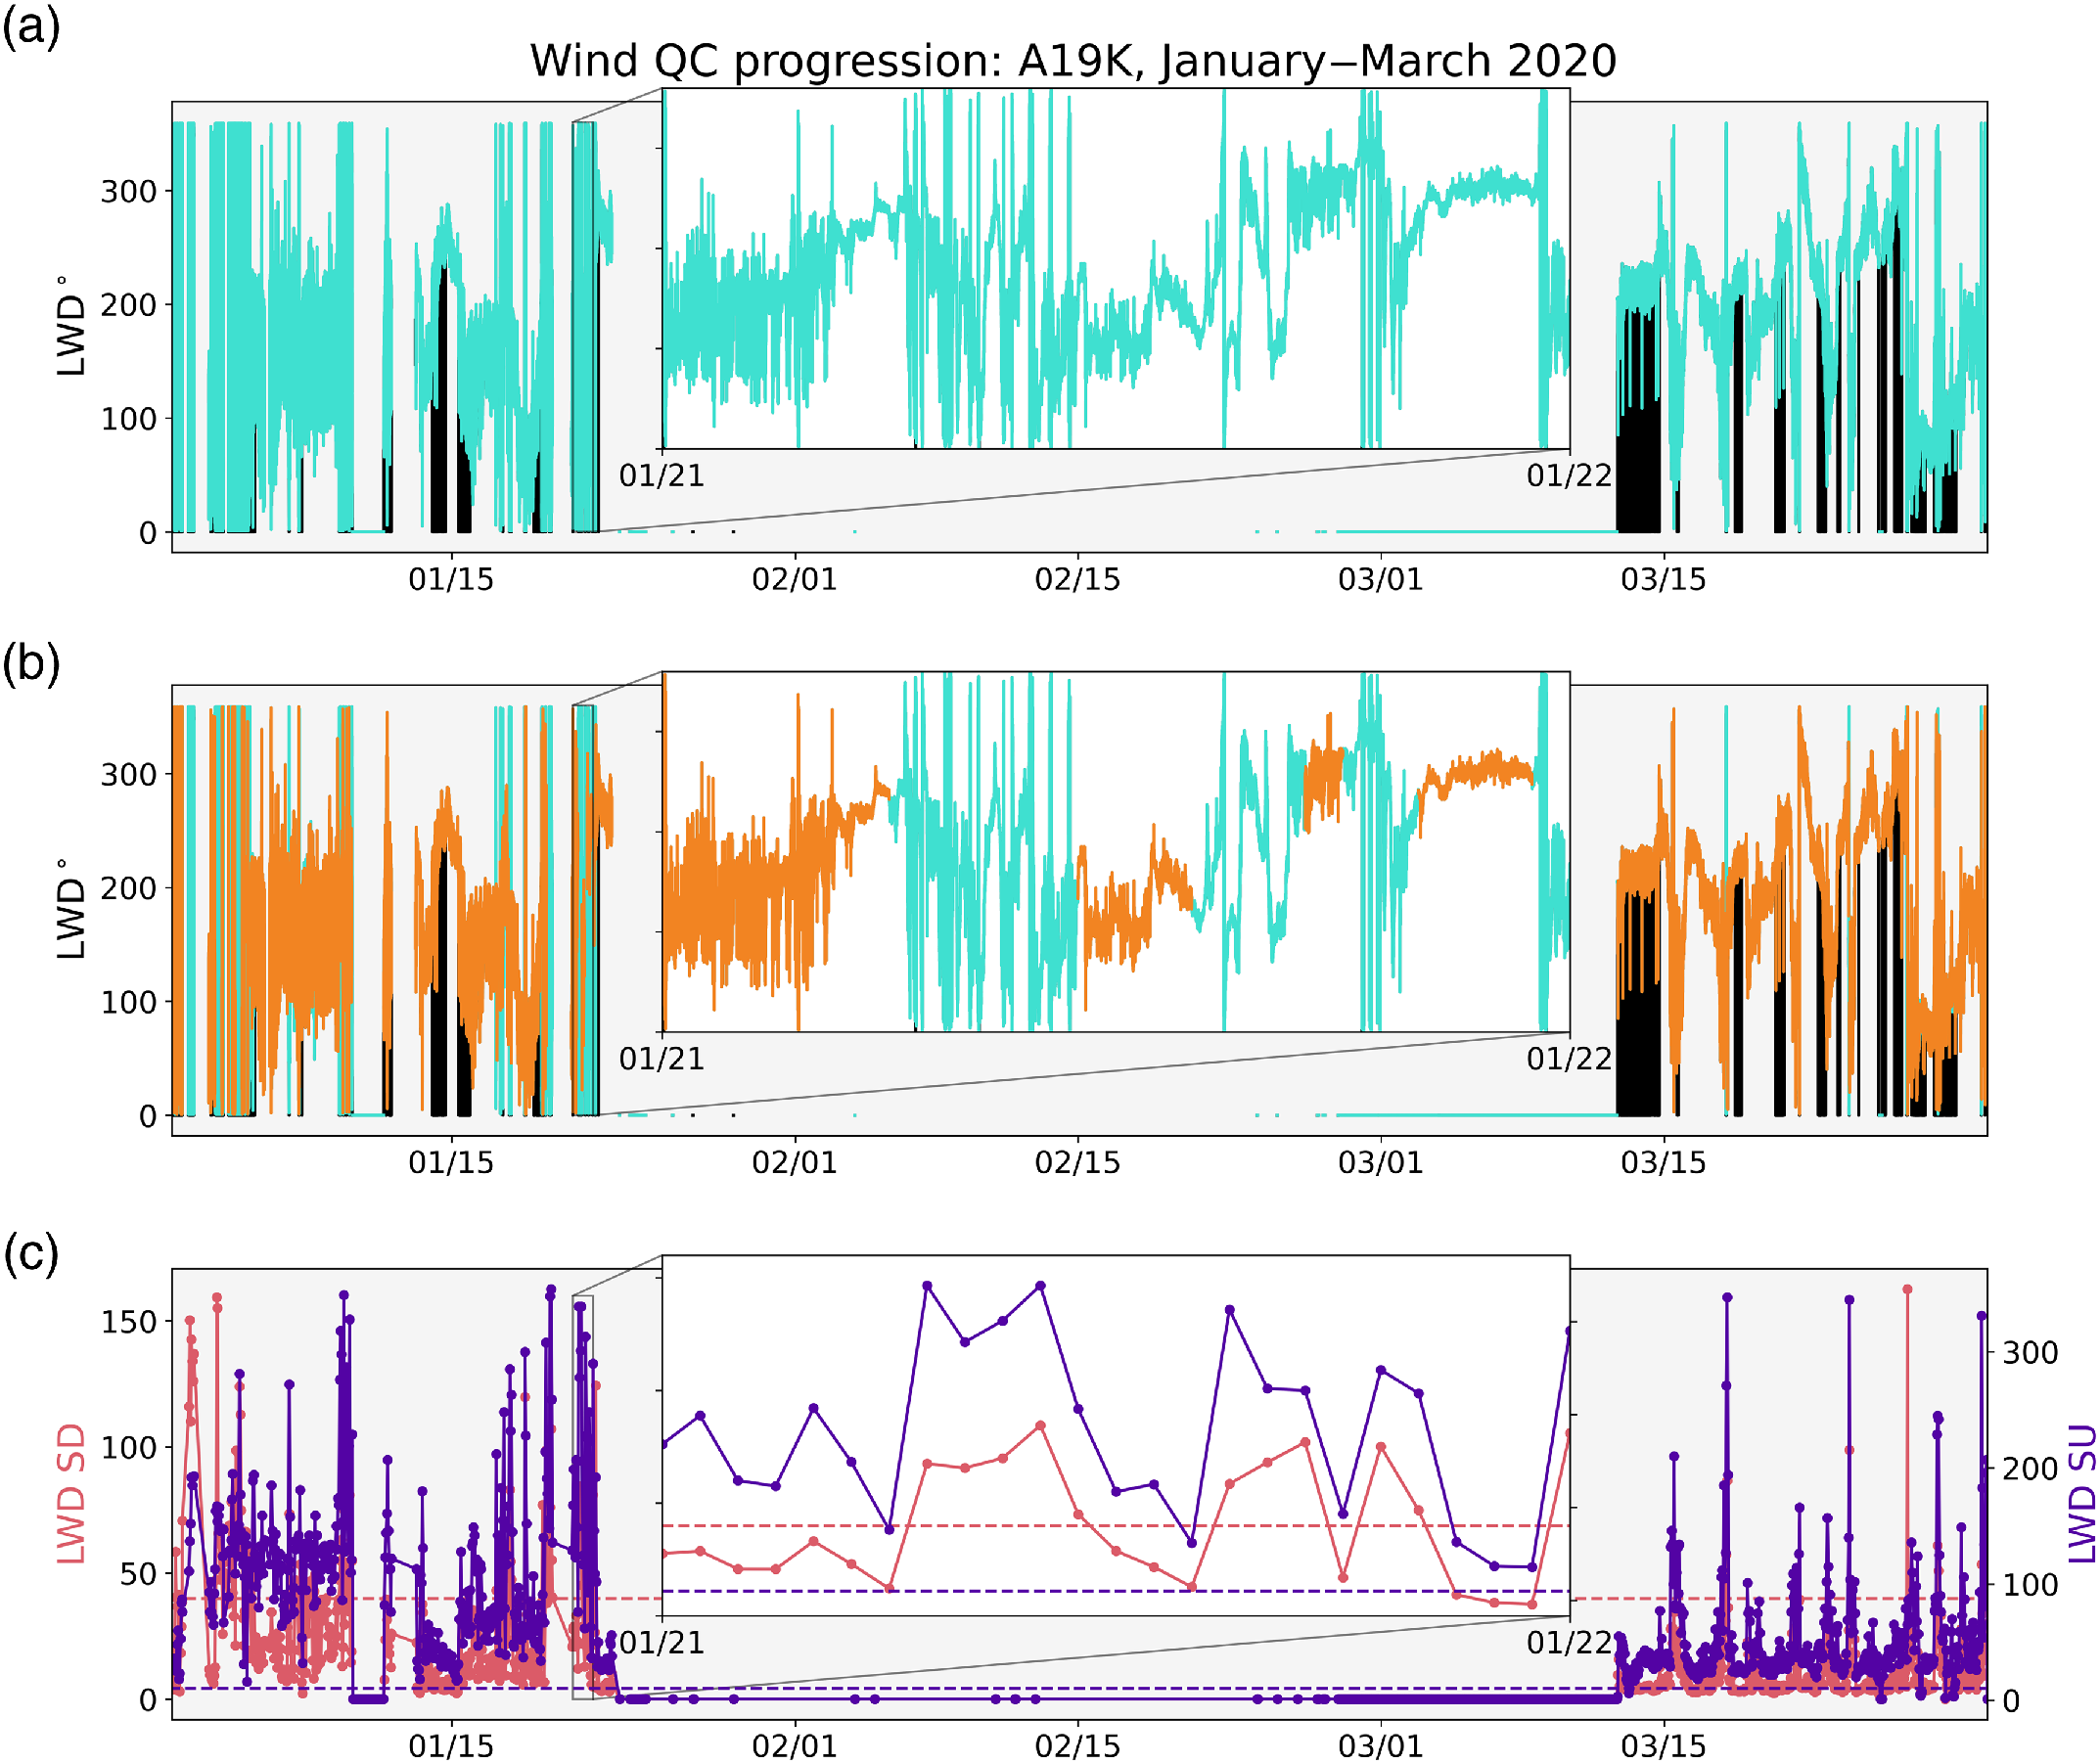 Wind data quality control (QC) for station A19K from January to March 2020. (a) Raw (black) and retained (turquoise) waveforms after removing hourly time periods containing nonphysically high or low values, and removing all zeros in the data. (b) Final retained waveform (orange) after all stages of QC, including removing hours of high standard deviation (SD) from zero‐removed data, along with data from panel (a). (c) Pink circles show the average SD, and purple circles show the average sample unique (SU) fo